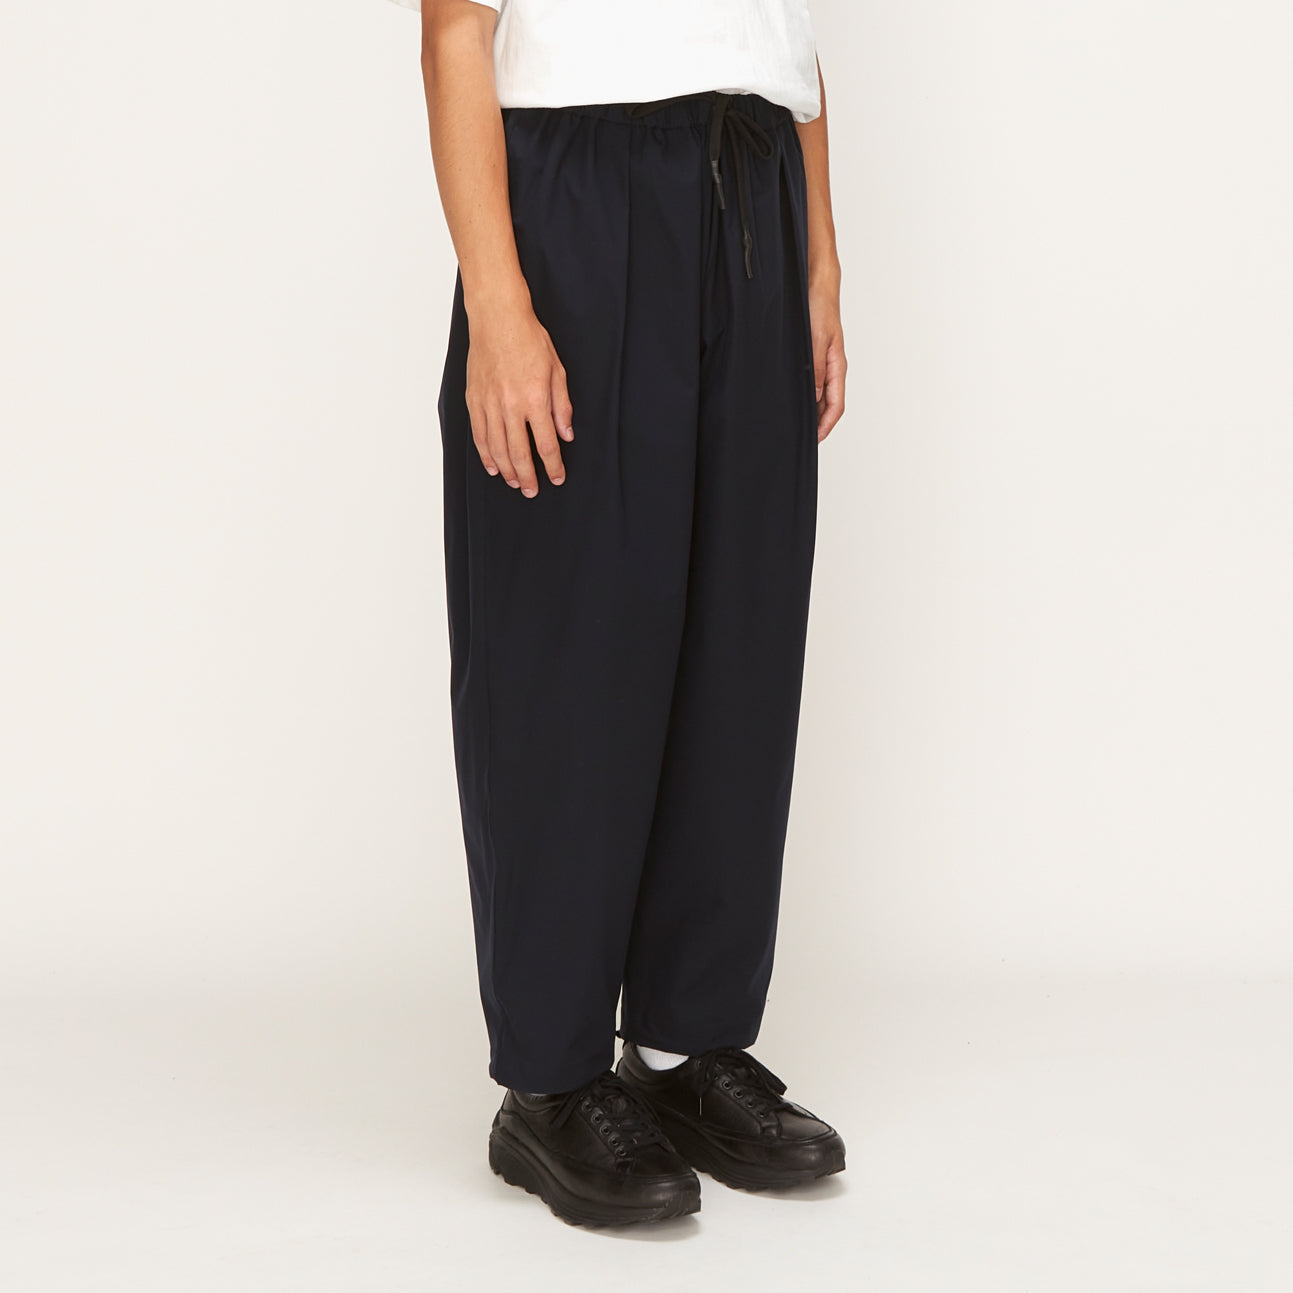 UNTRACE Basic Tapered Sweat Track Pants dr-idol.com